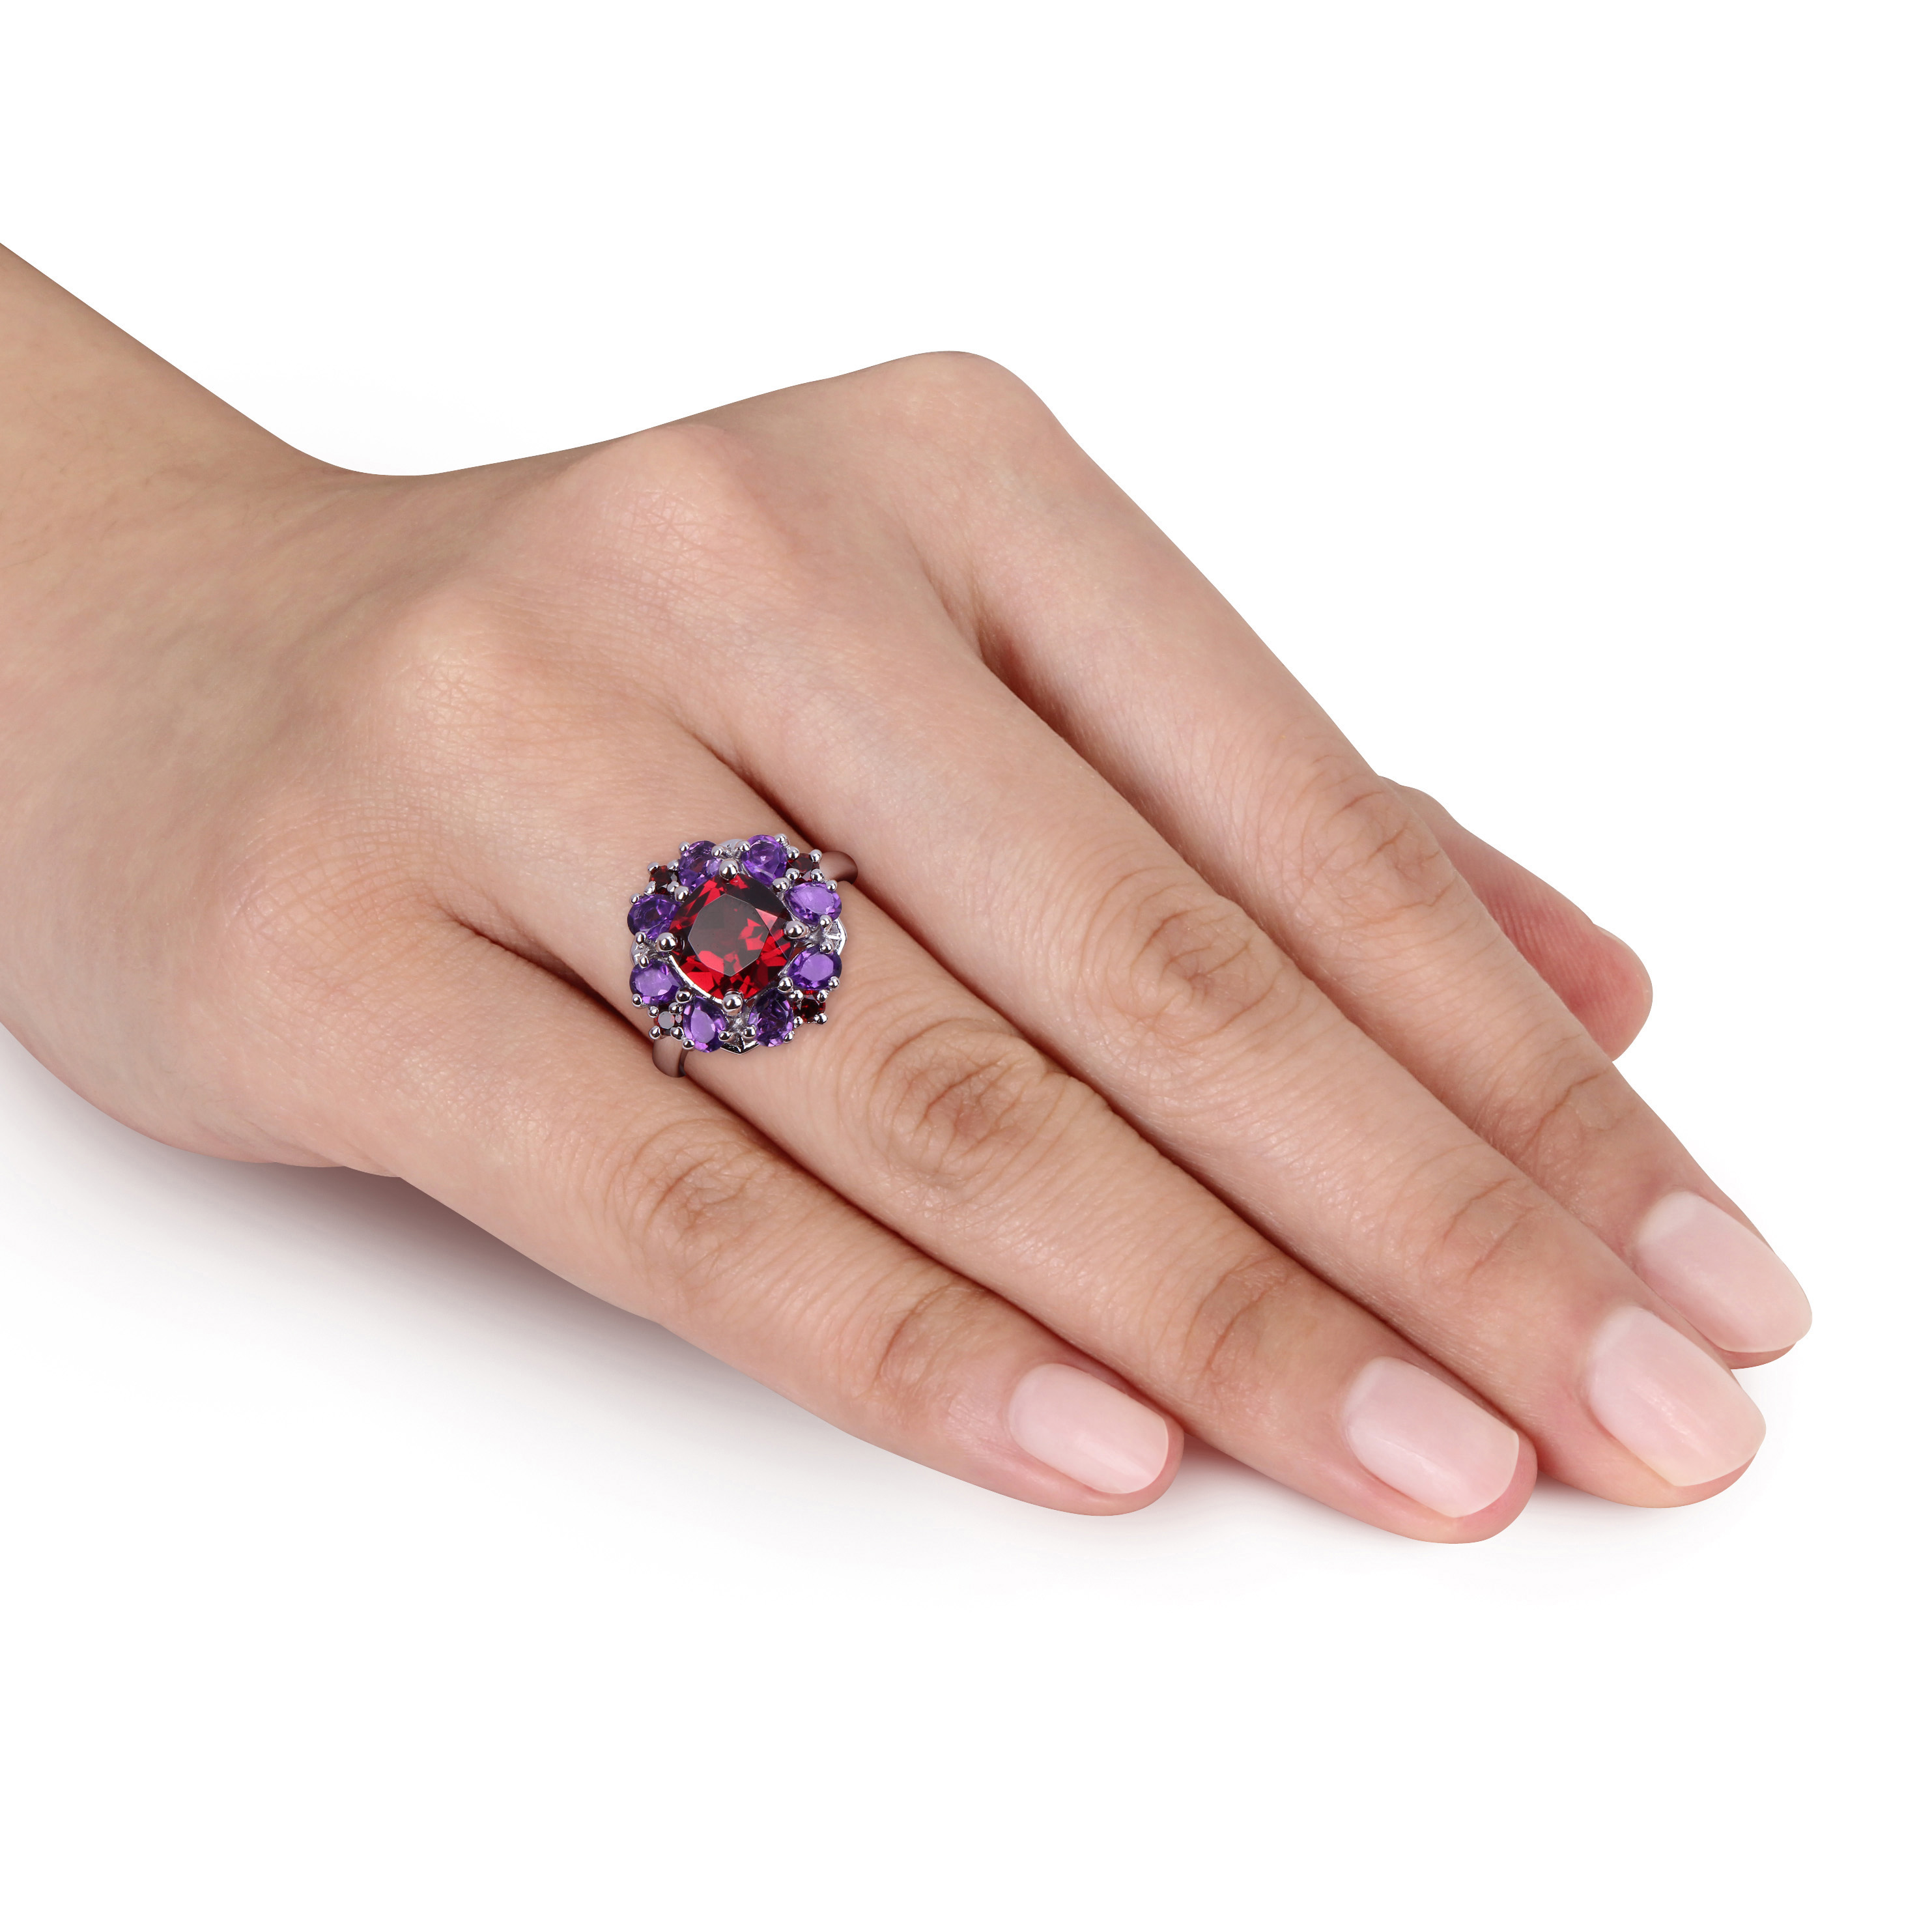 4 2/5 CT TGW Garnet and African Amethyst Quatrefoil Floral Ring in Sterling Silver